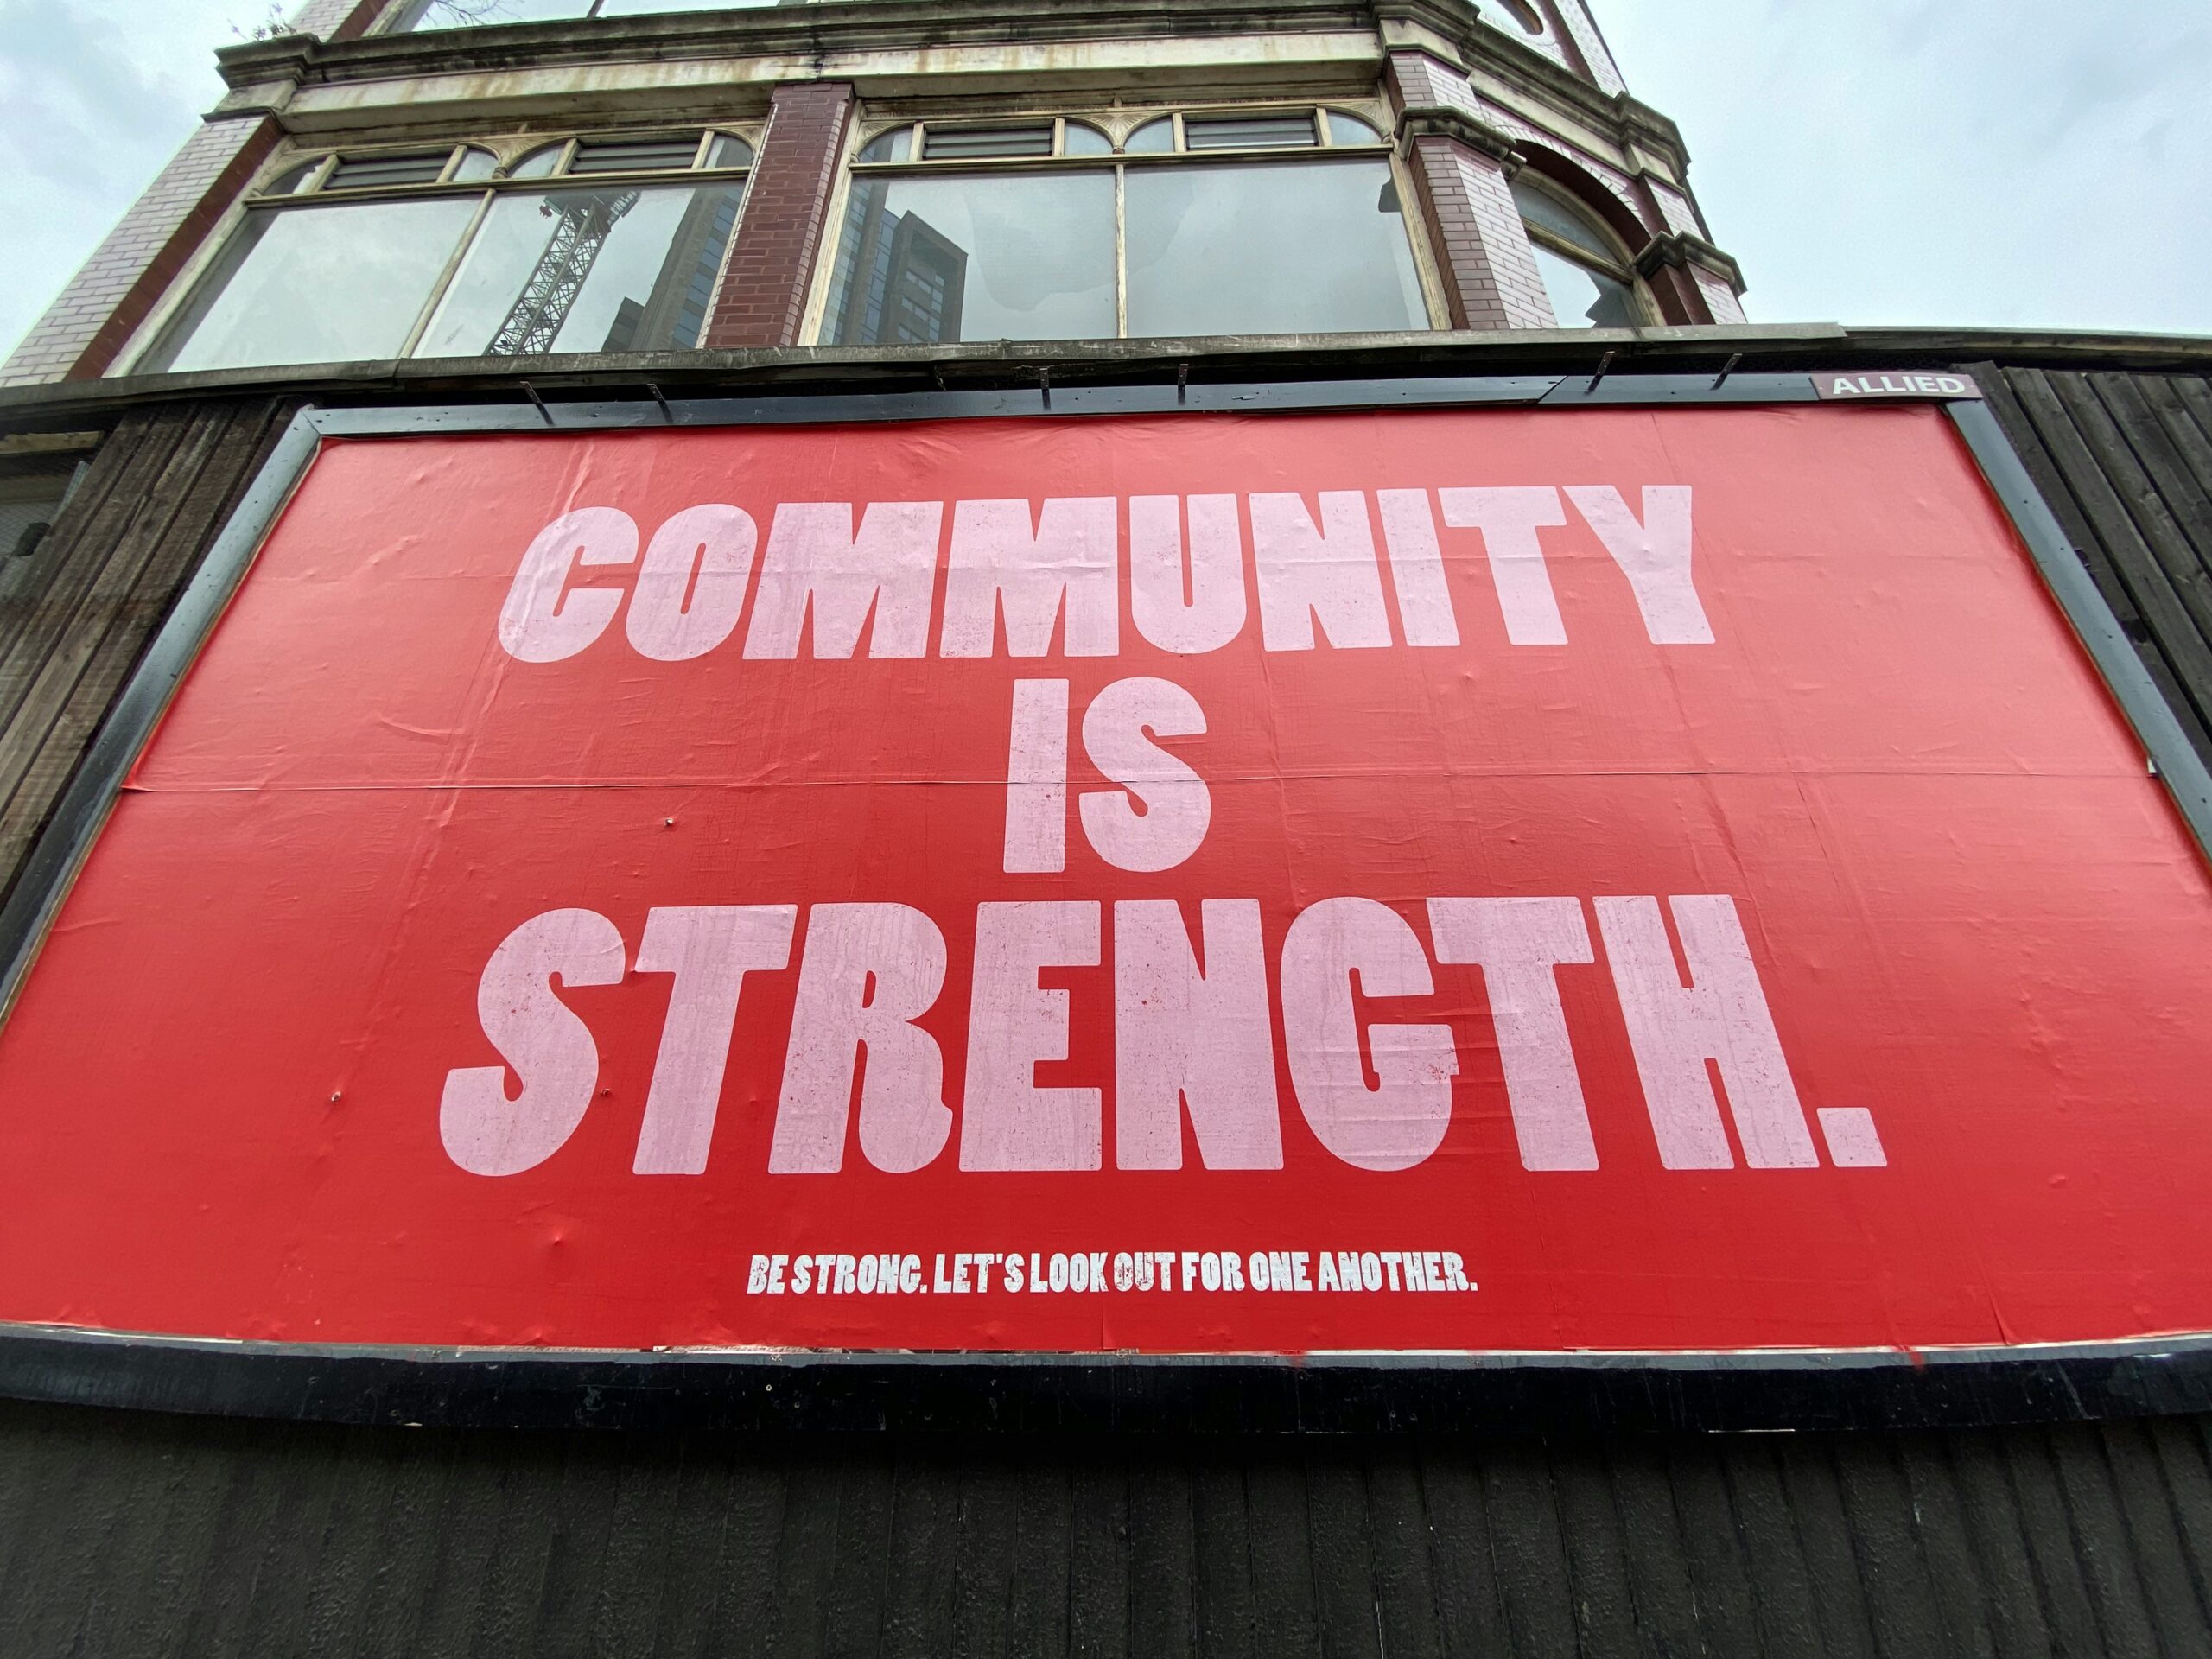 A large red billboard on the side of a building says 'Community is Strength'